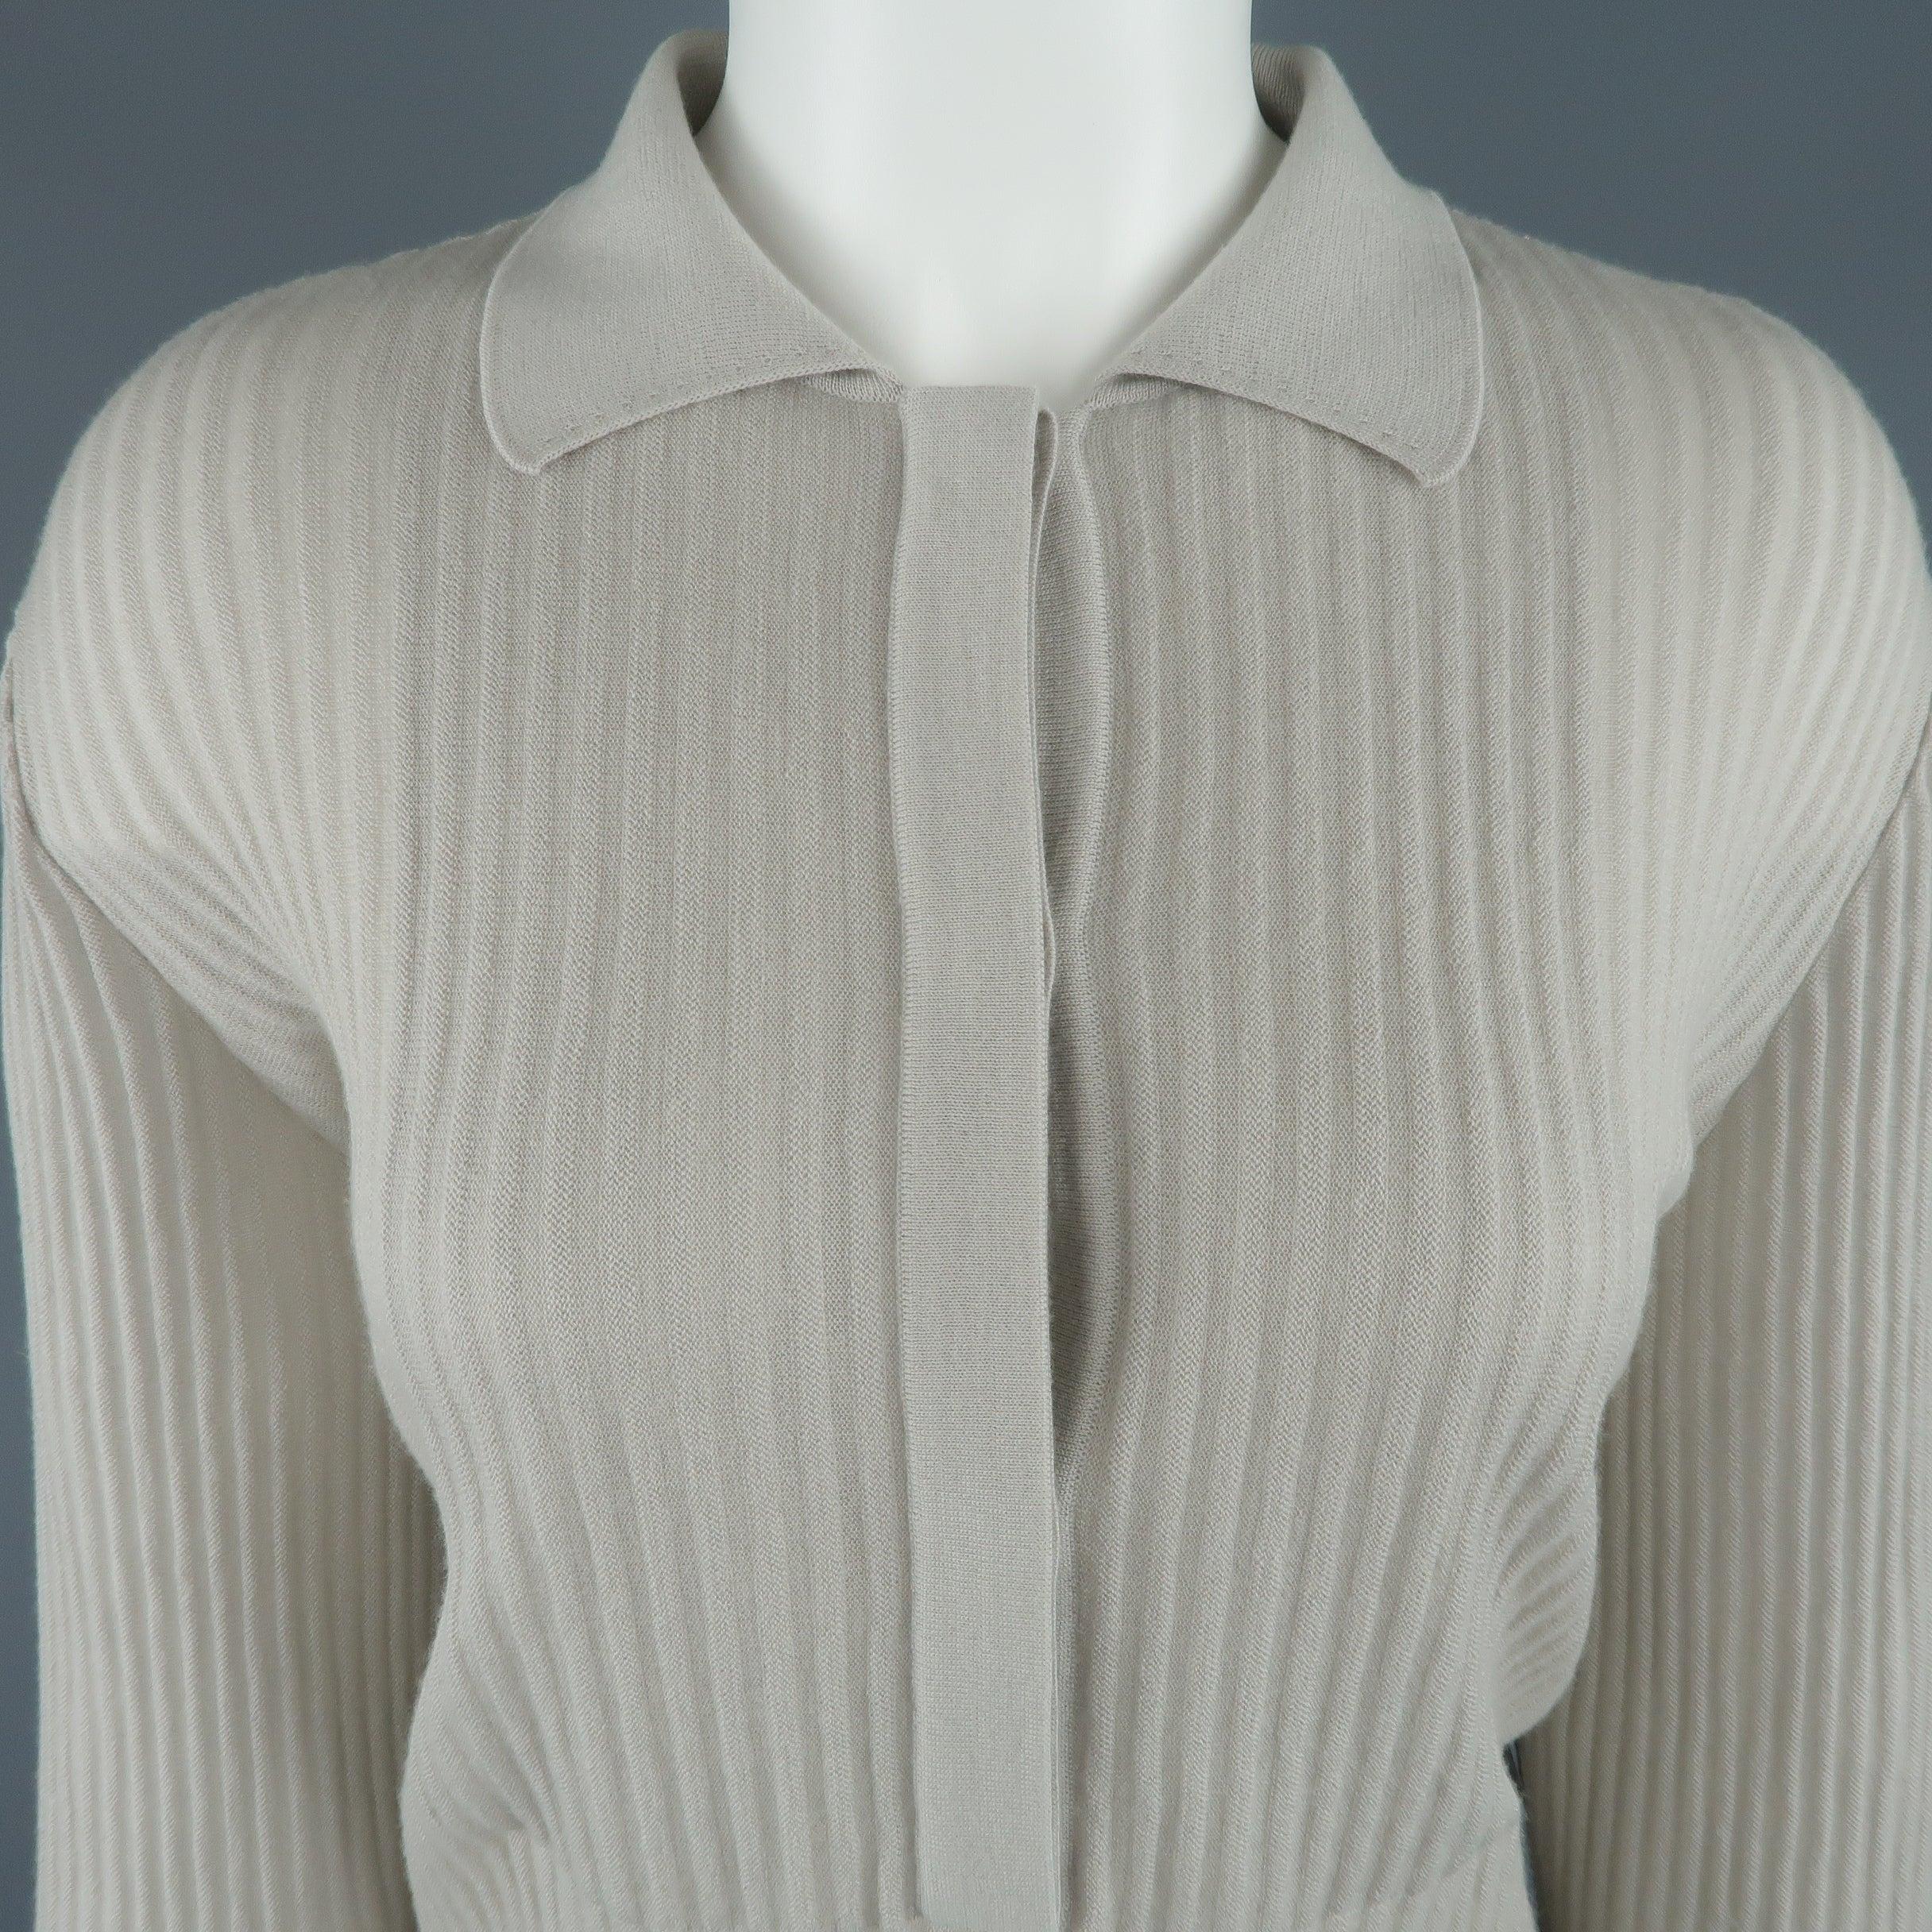 GIORGIO ARMANI pullover comes in sheer ribbed cashmere knit with a half button collared front. Made in Italy.
Excellent Pre-Owned Condition.
 

Marked:   IT 46
 

Measurements: 
  
l	Shoulder: 16 inches 
l	Bust: 40 inches 
l	Sleeve: 24 inches